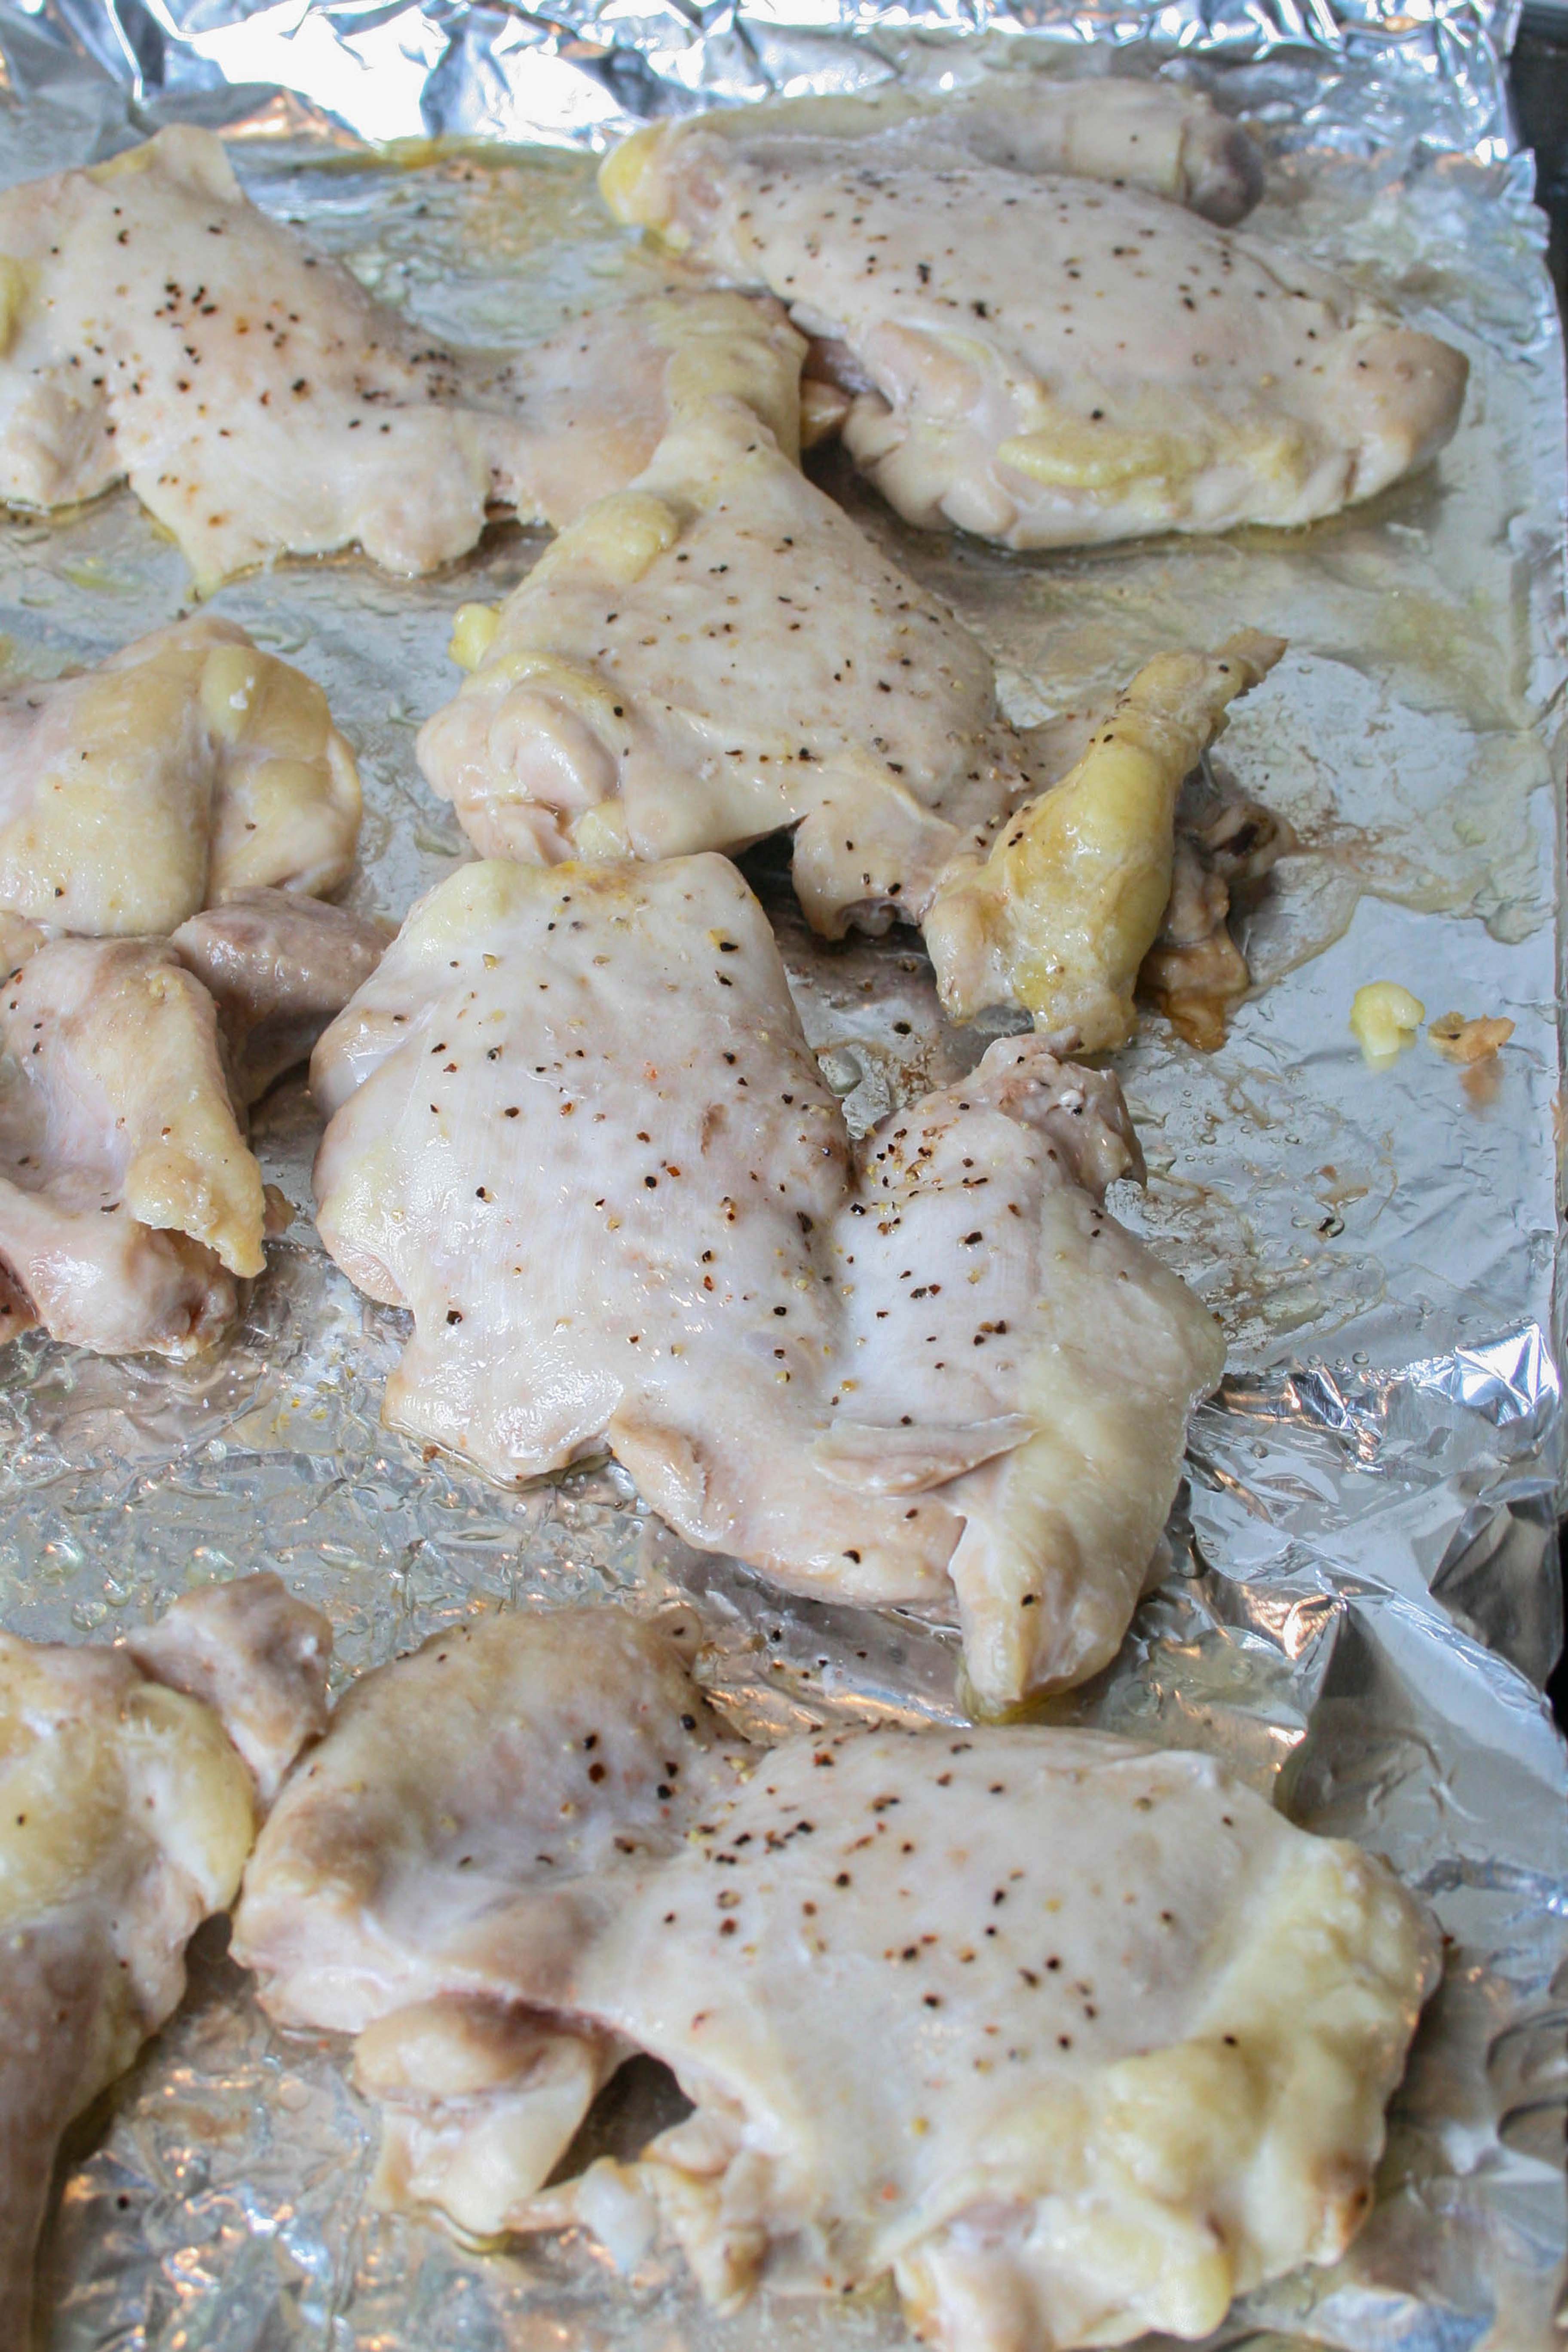 Oven baked chicken thighs